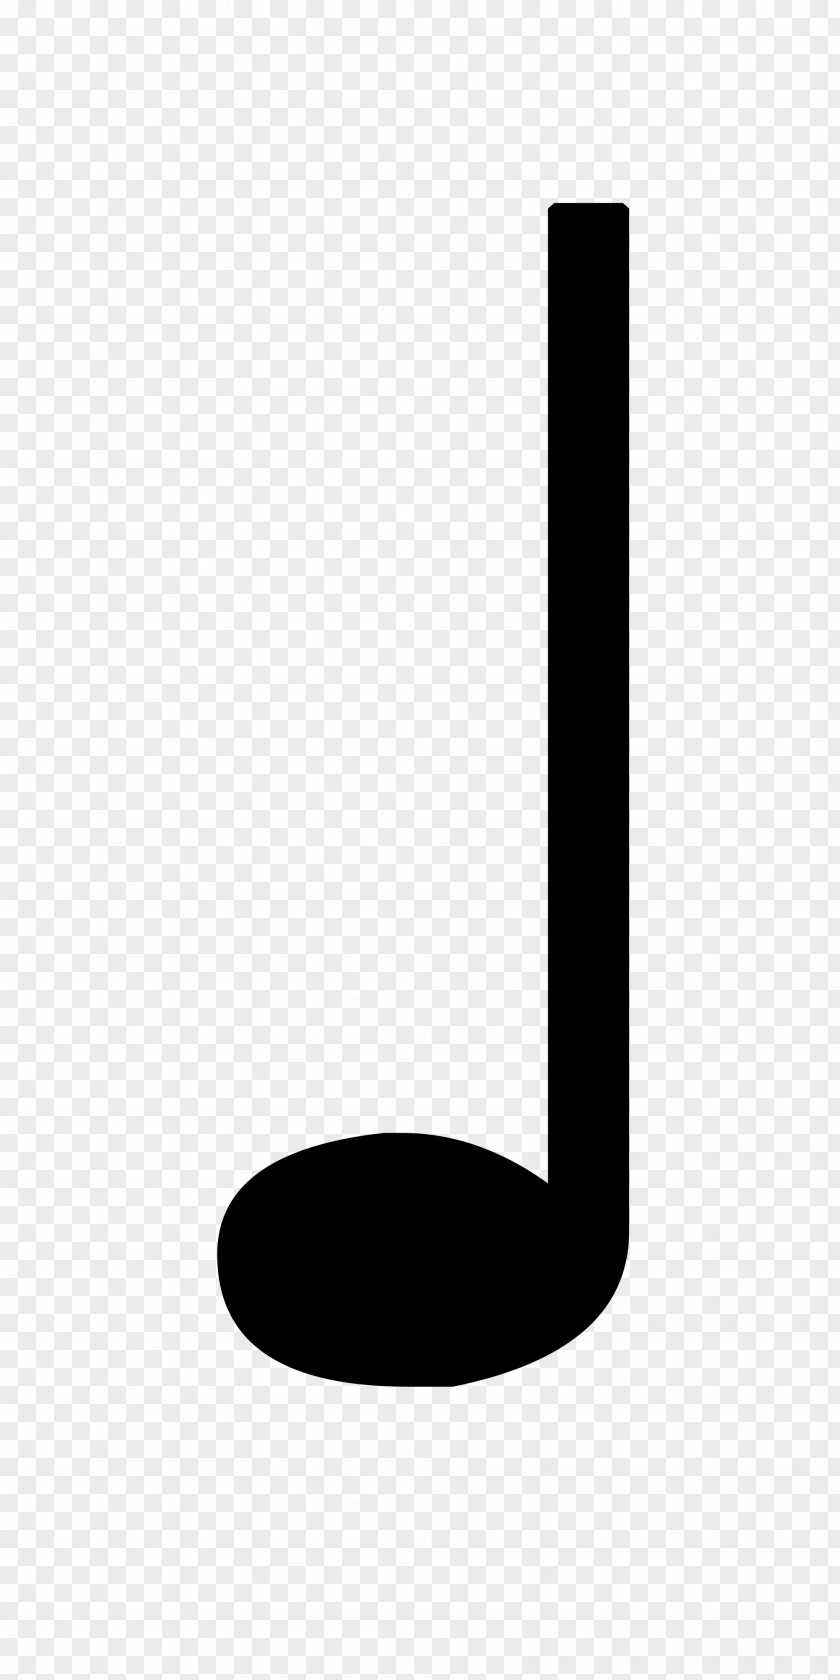 Musical Note Quarter Rest Notation Eighth PNG